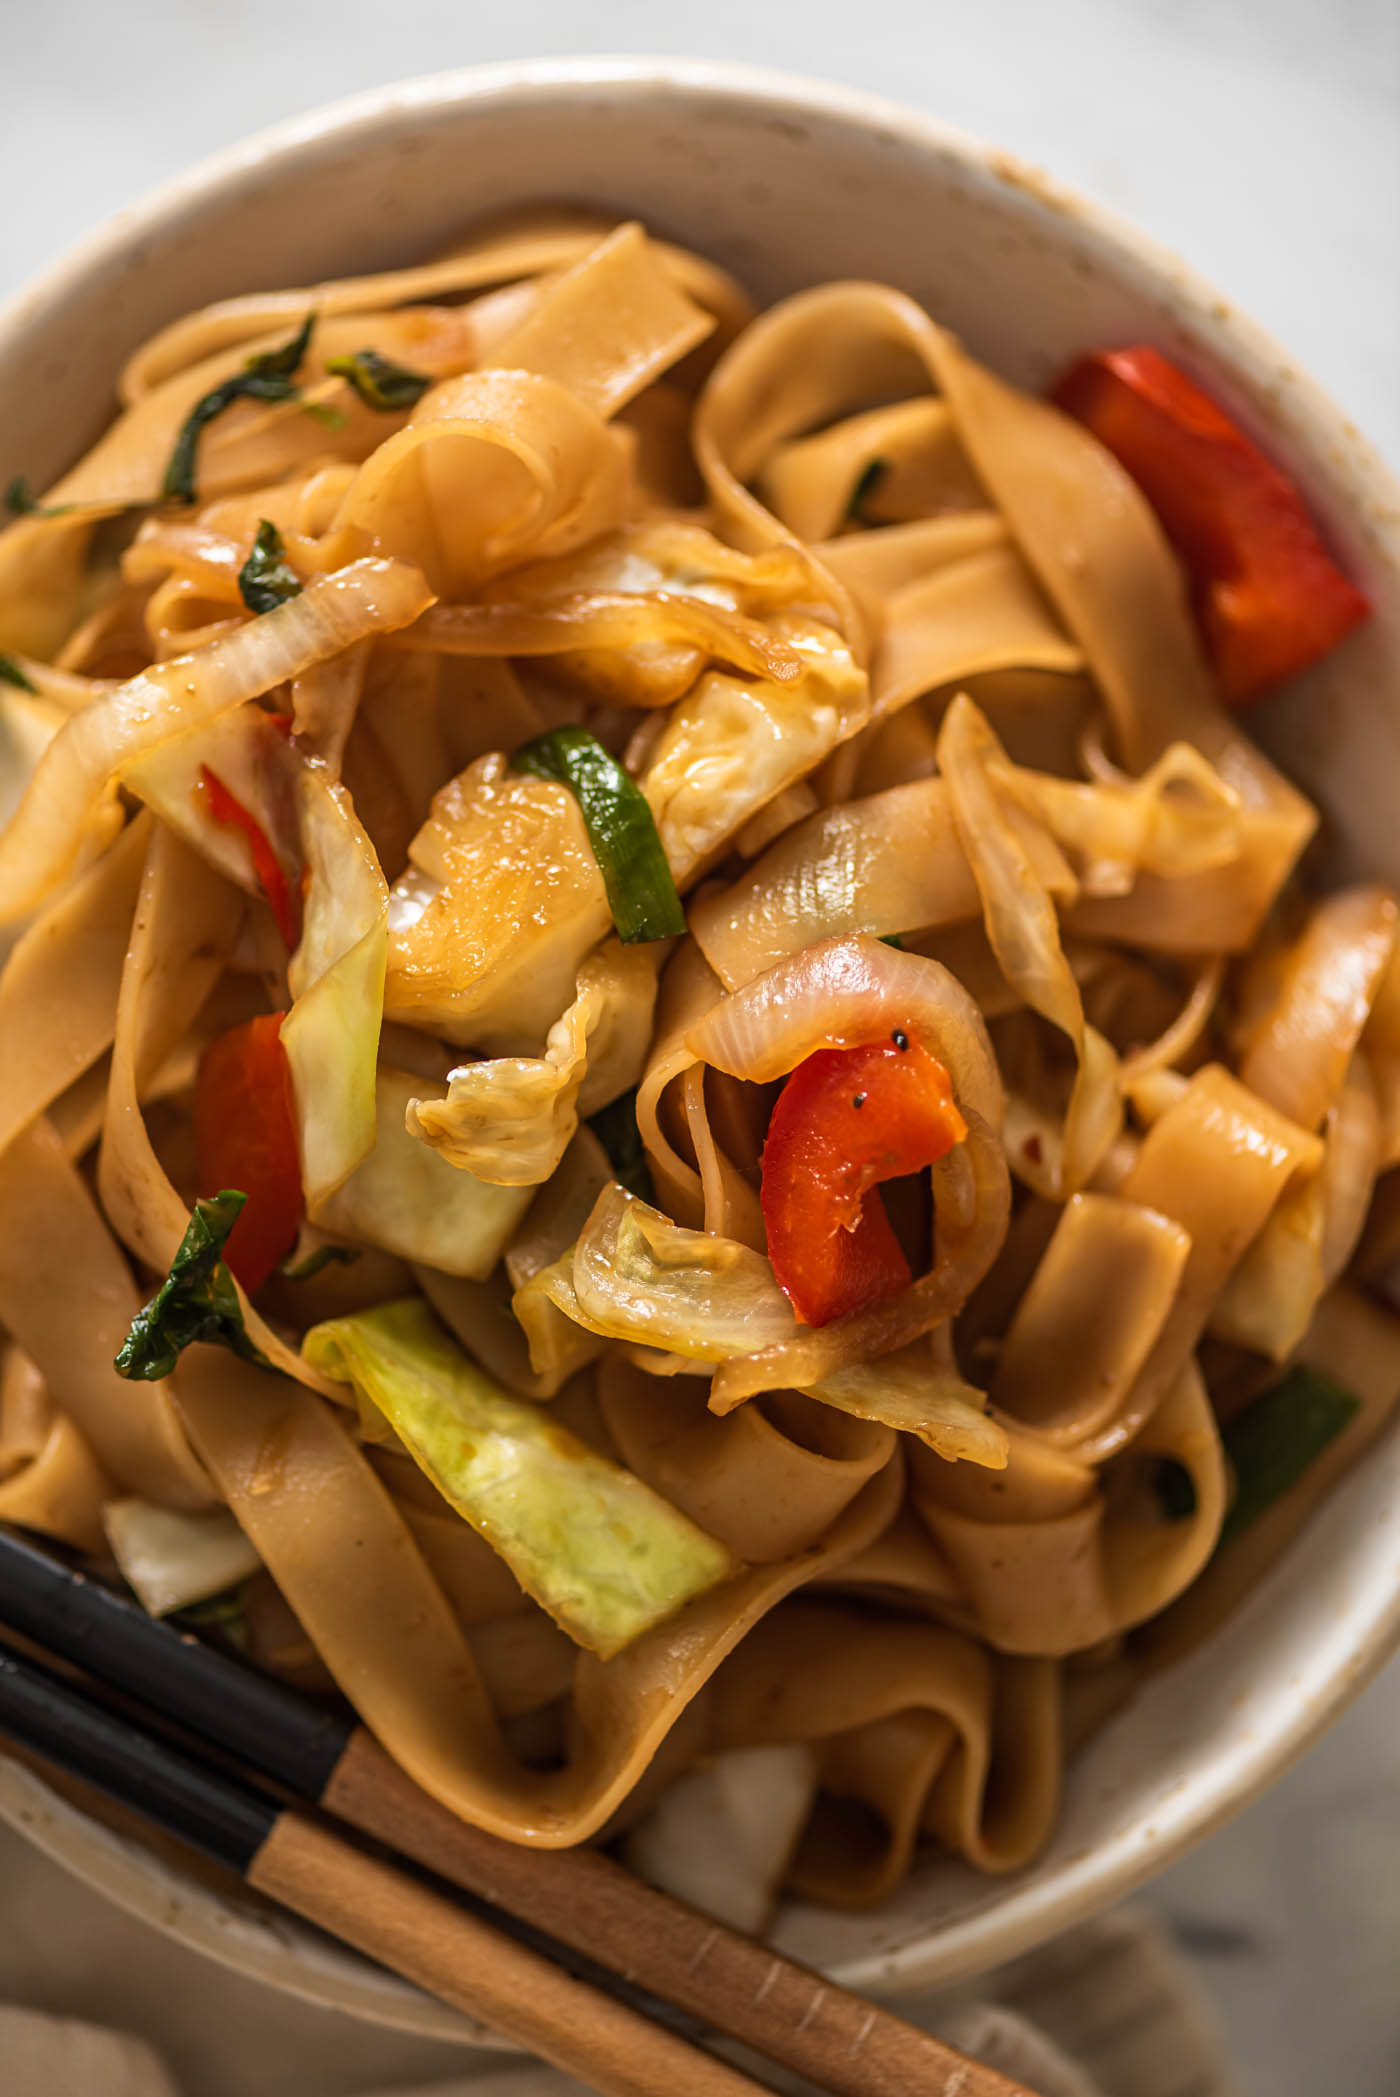 A bowl of drunken noodles with veggies. A set of chopsticks rests on the side of the bowl.